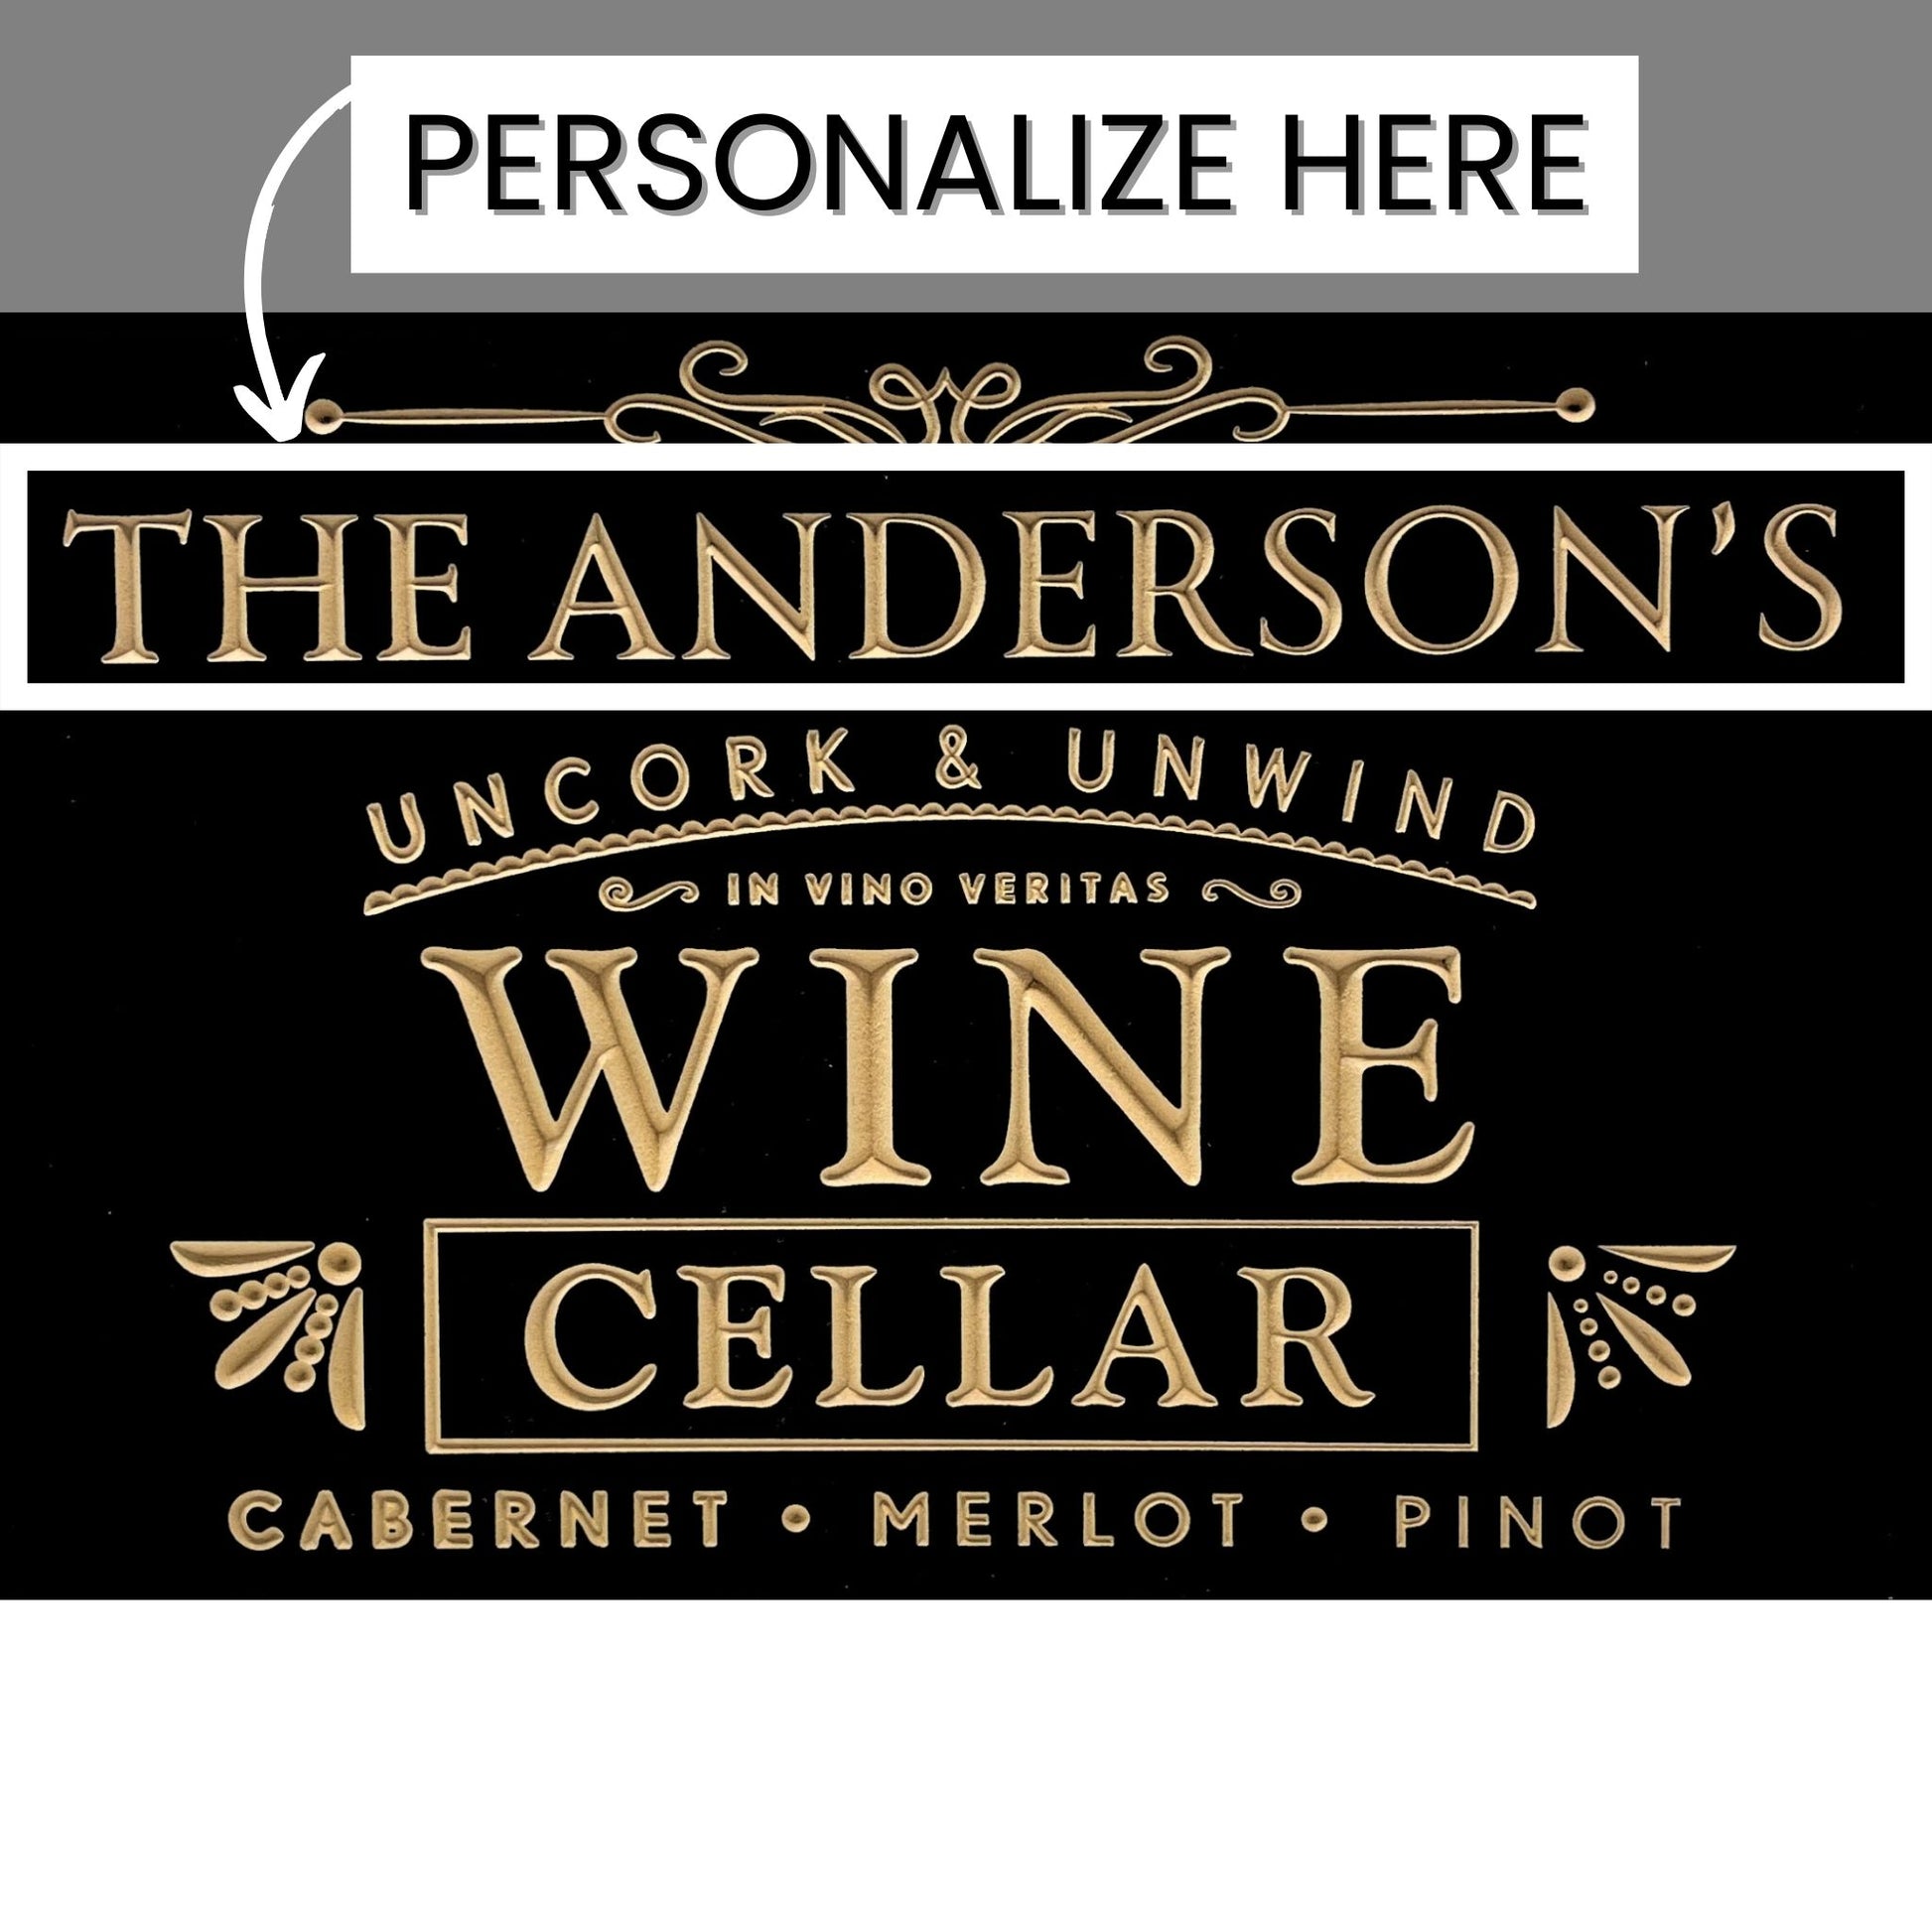 Personalized Wine Cellar Bar Sign